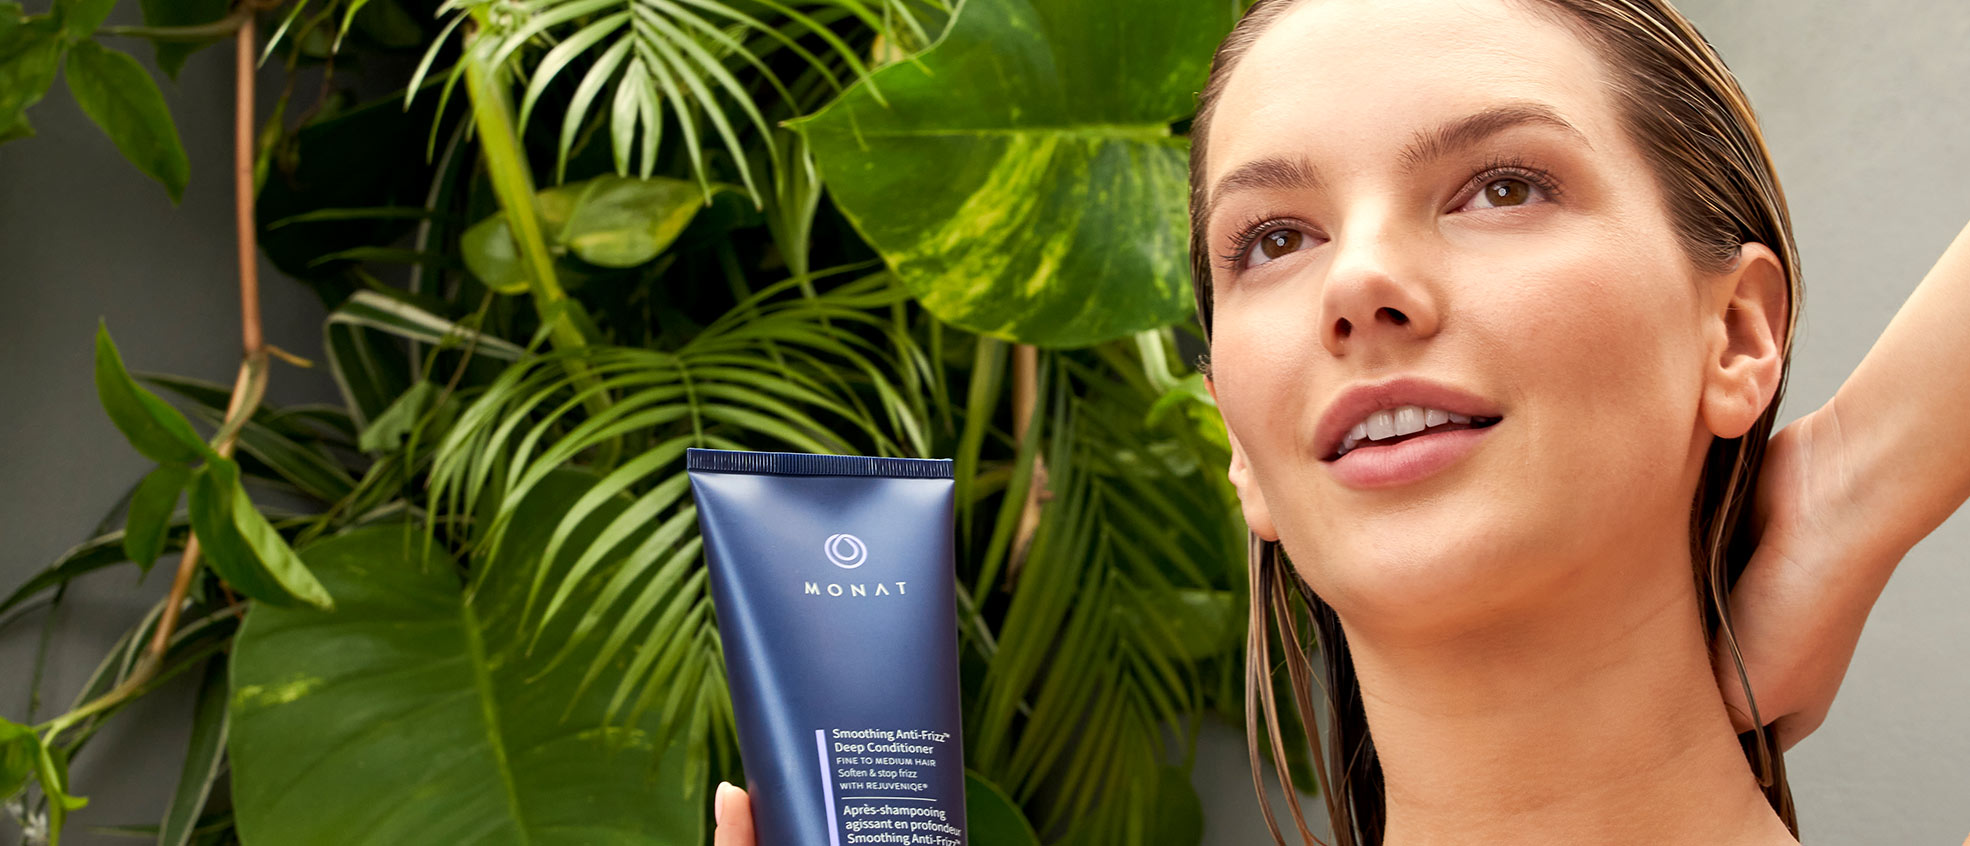 A blonde female with damp hair, standing near greenery and holding Smoothing Anti-Frizz™ Deep Conditioner.